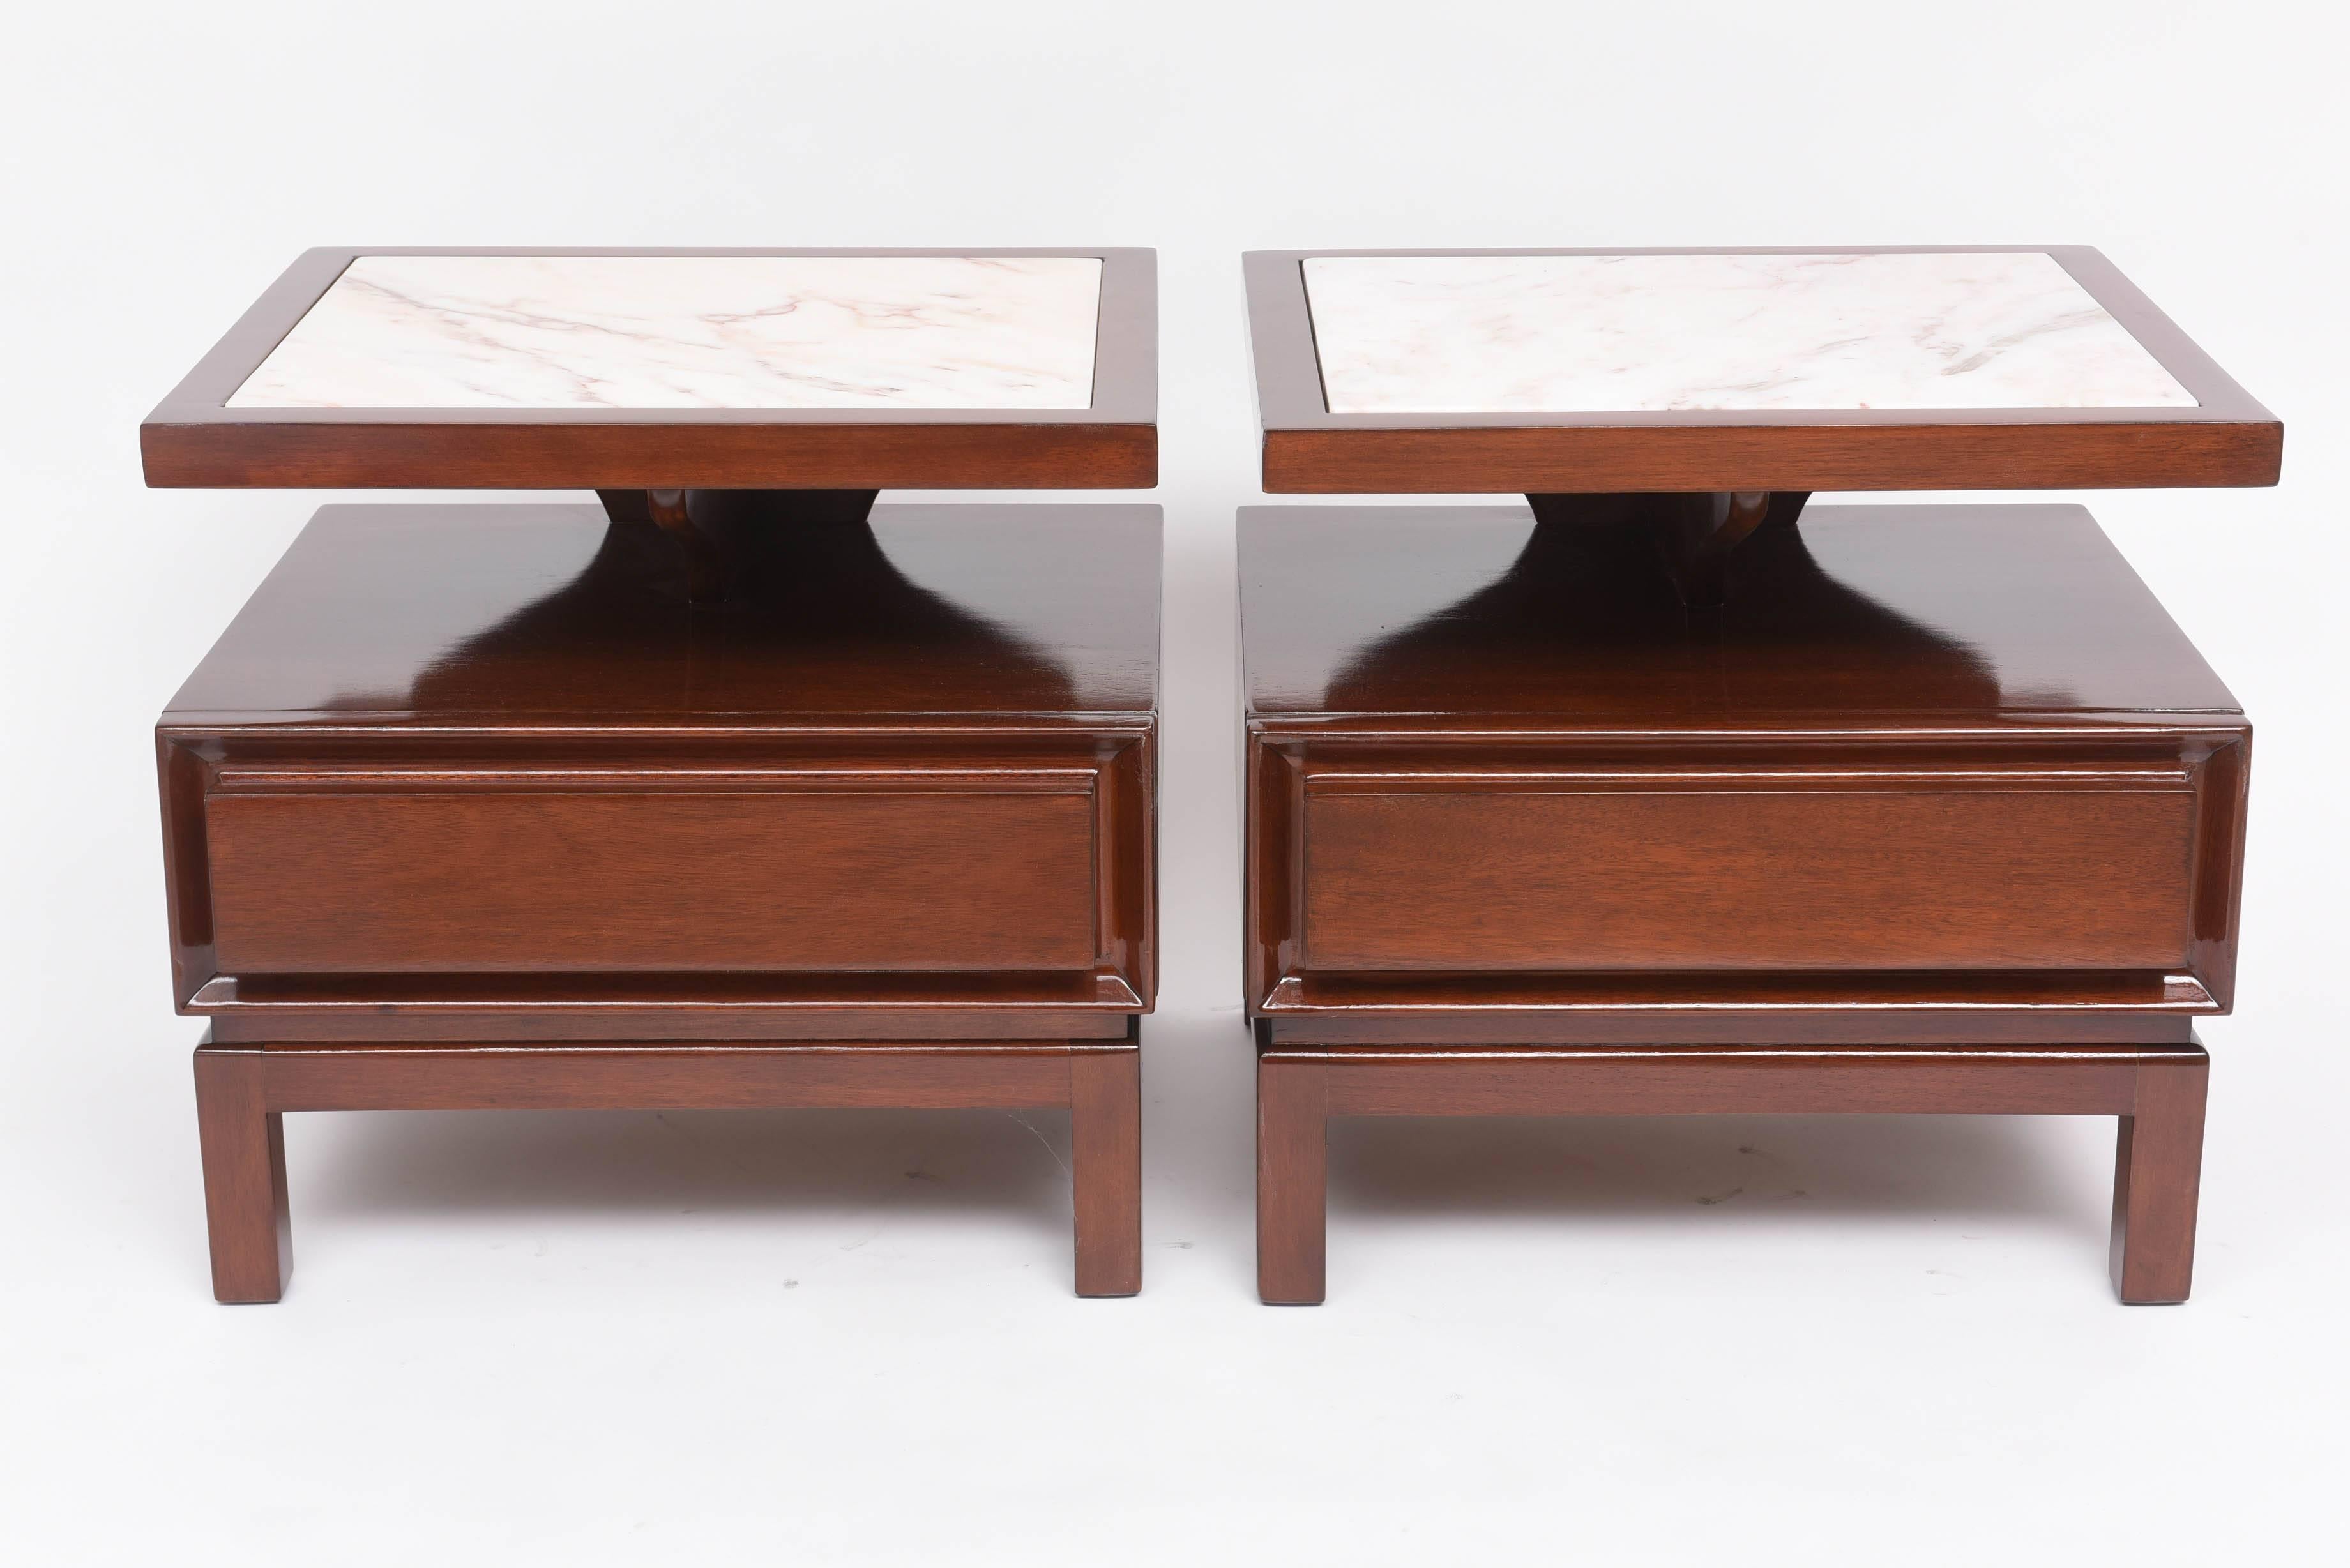 This handsome pair of mahogany and marble tables were created in the 1940s and are in the style of pieces designed by Harvey Probber.  The pieces have an American Modern sense to them with their asian overtones combined with the cantilevered